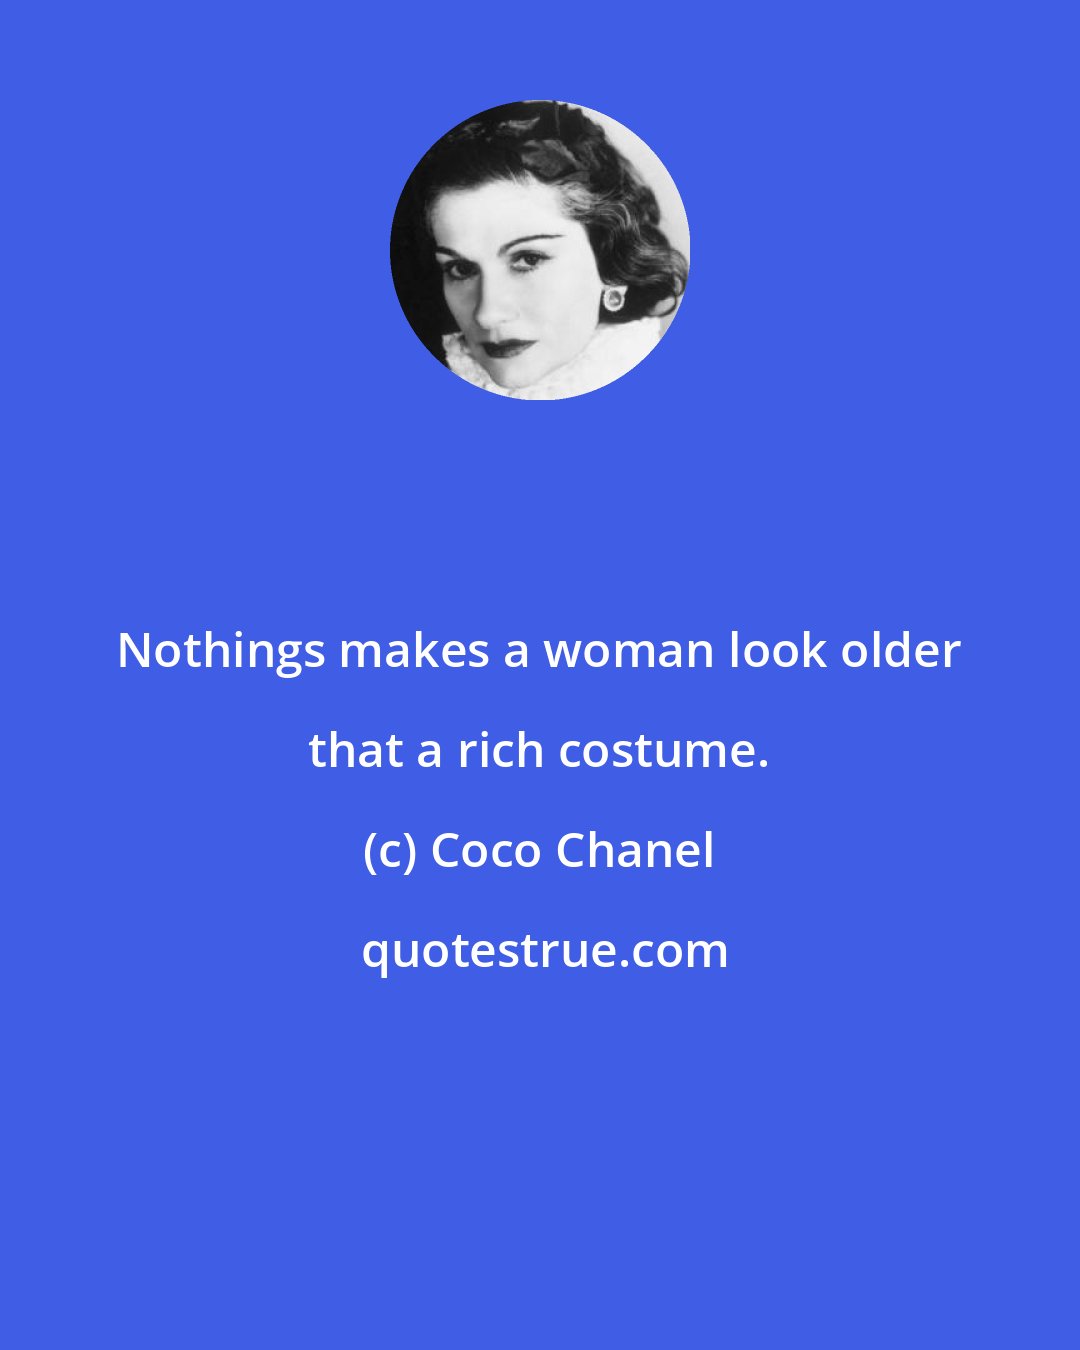 Coco Chanel: Nothings makes a woman look older that a rich costume.